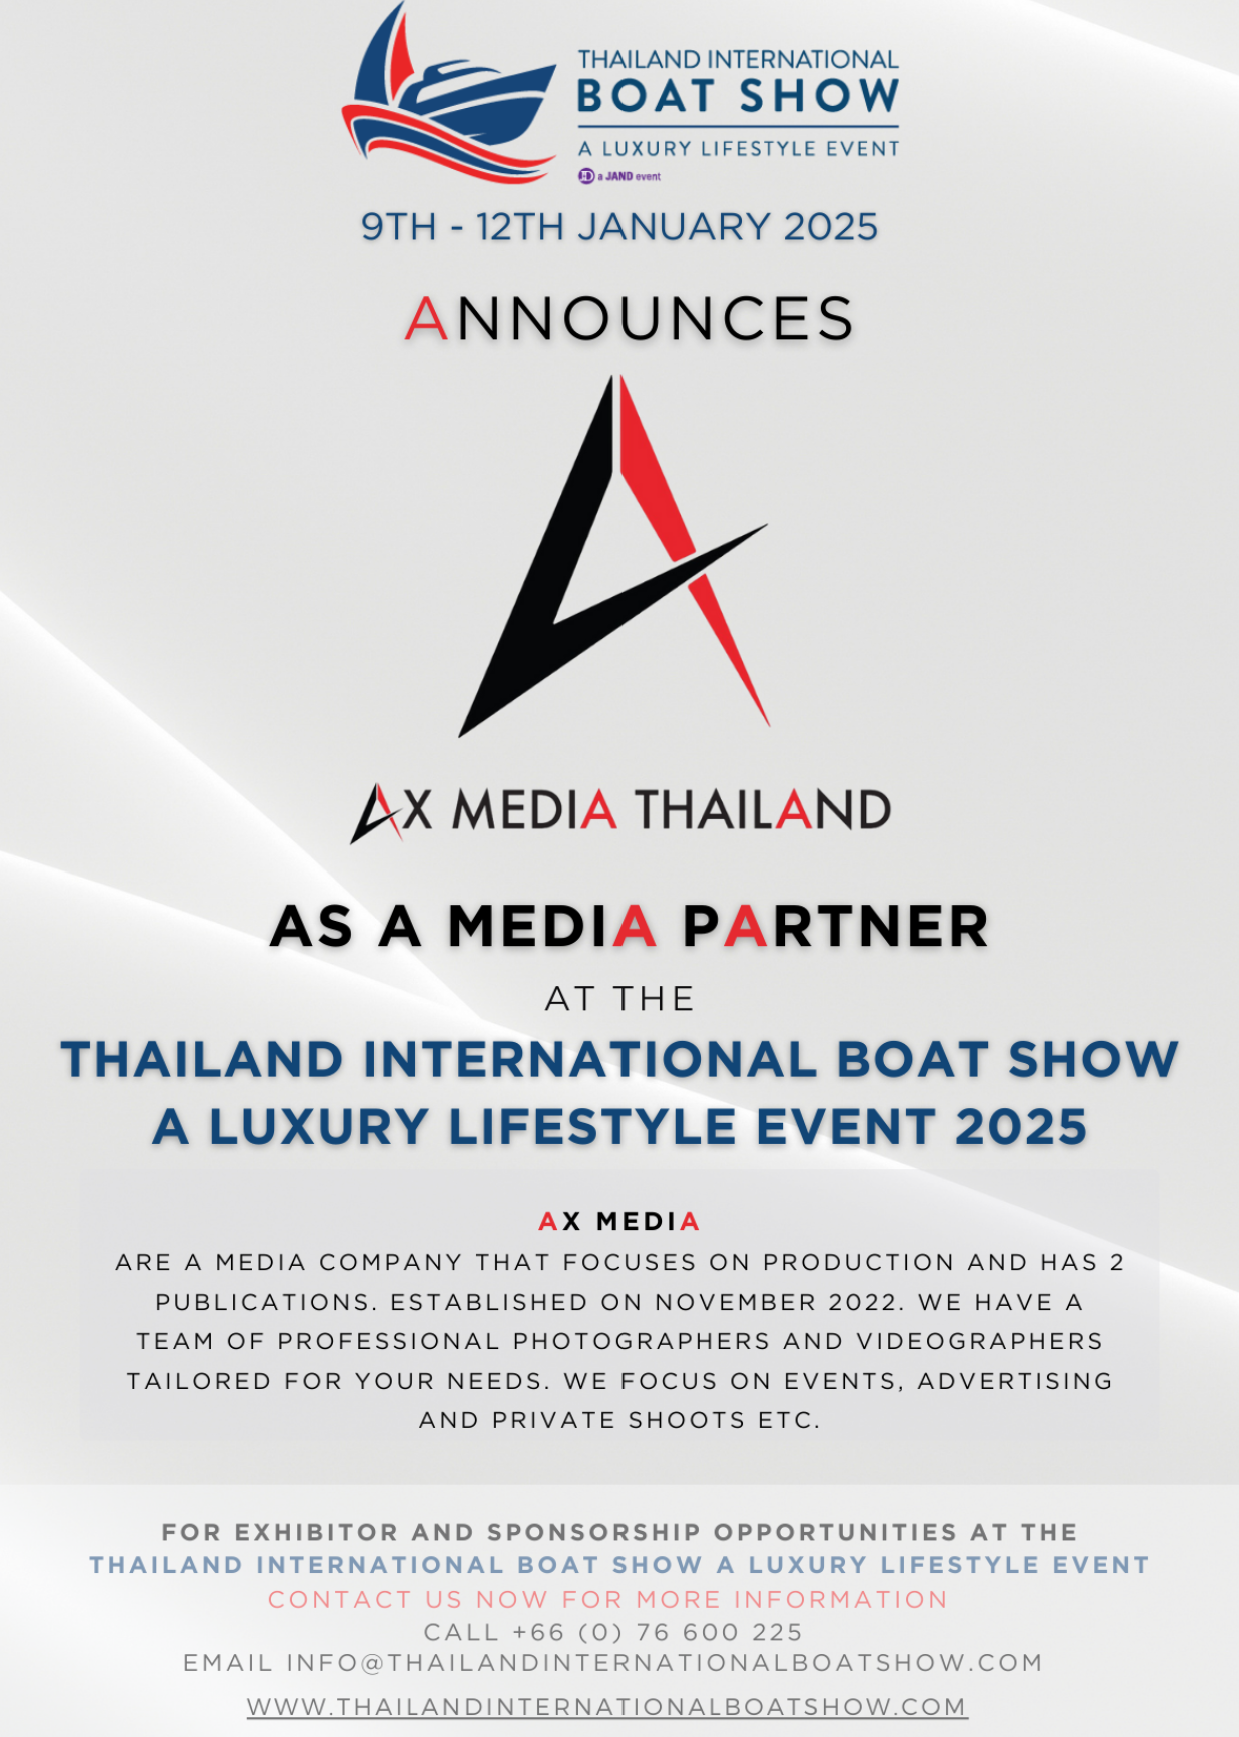 AX Media announces Media Partnership at the Thailand International Boat Show A Luxury Lifestyle Event 2025